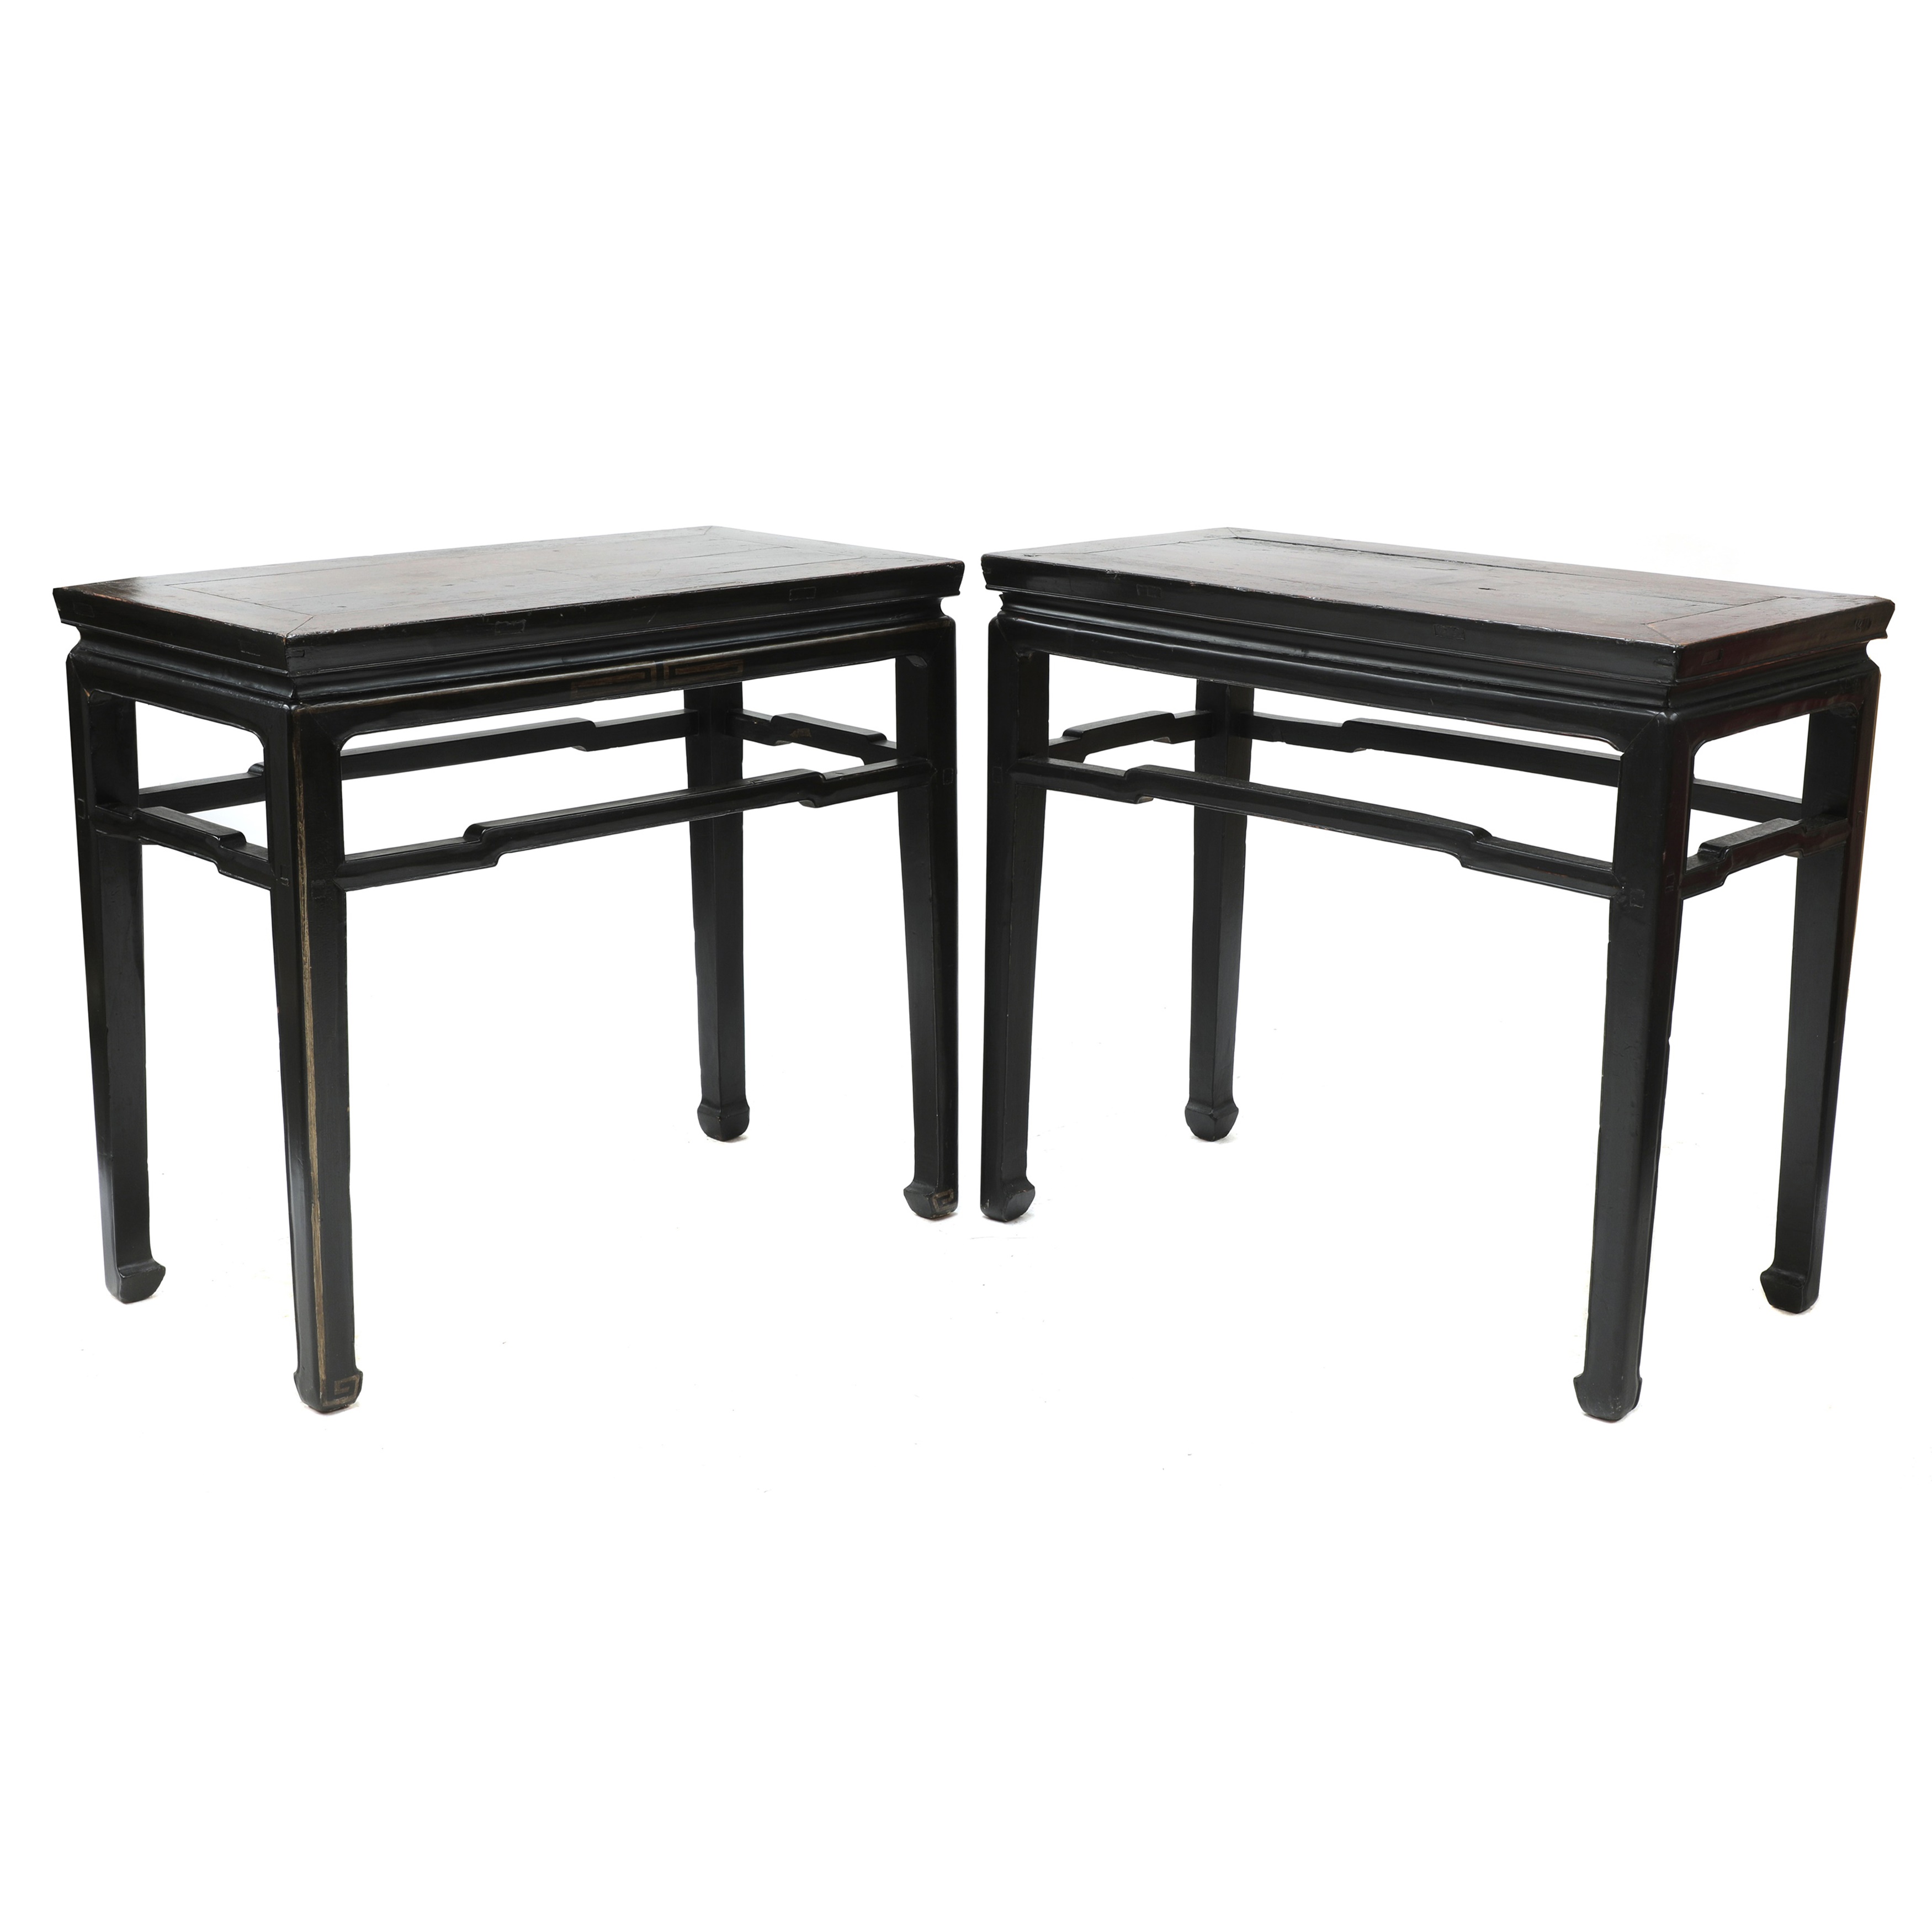 A pair of Chinese ebonised and parcel-gilt hardwood low tables